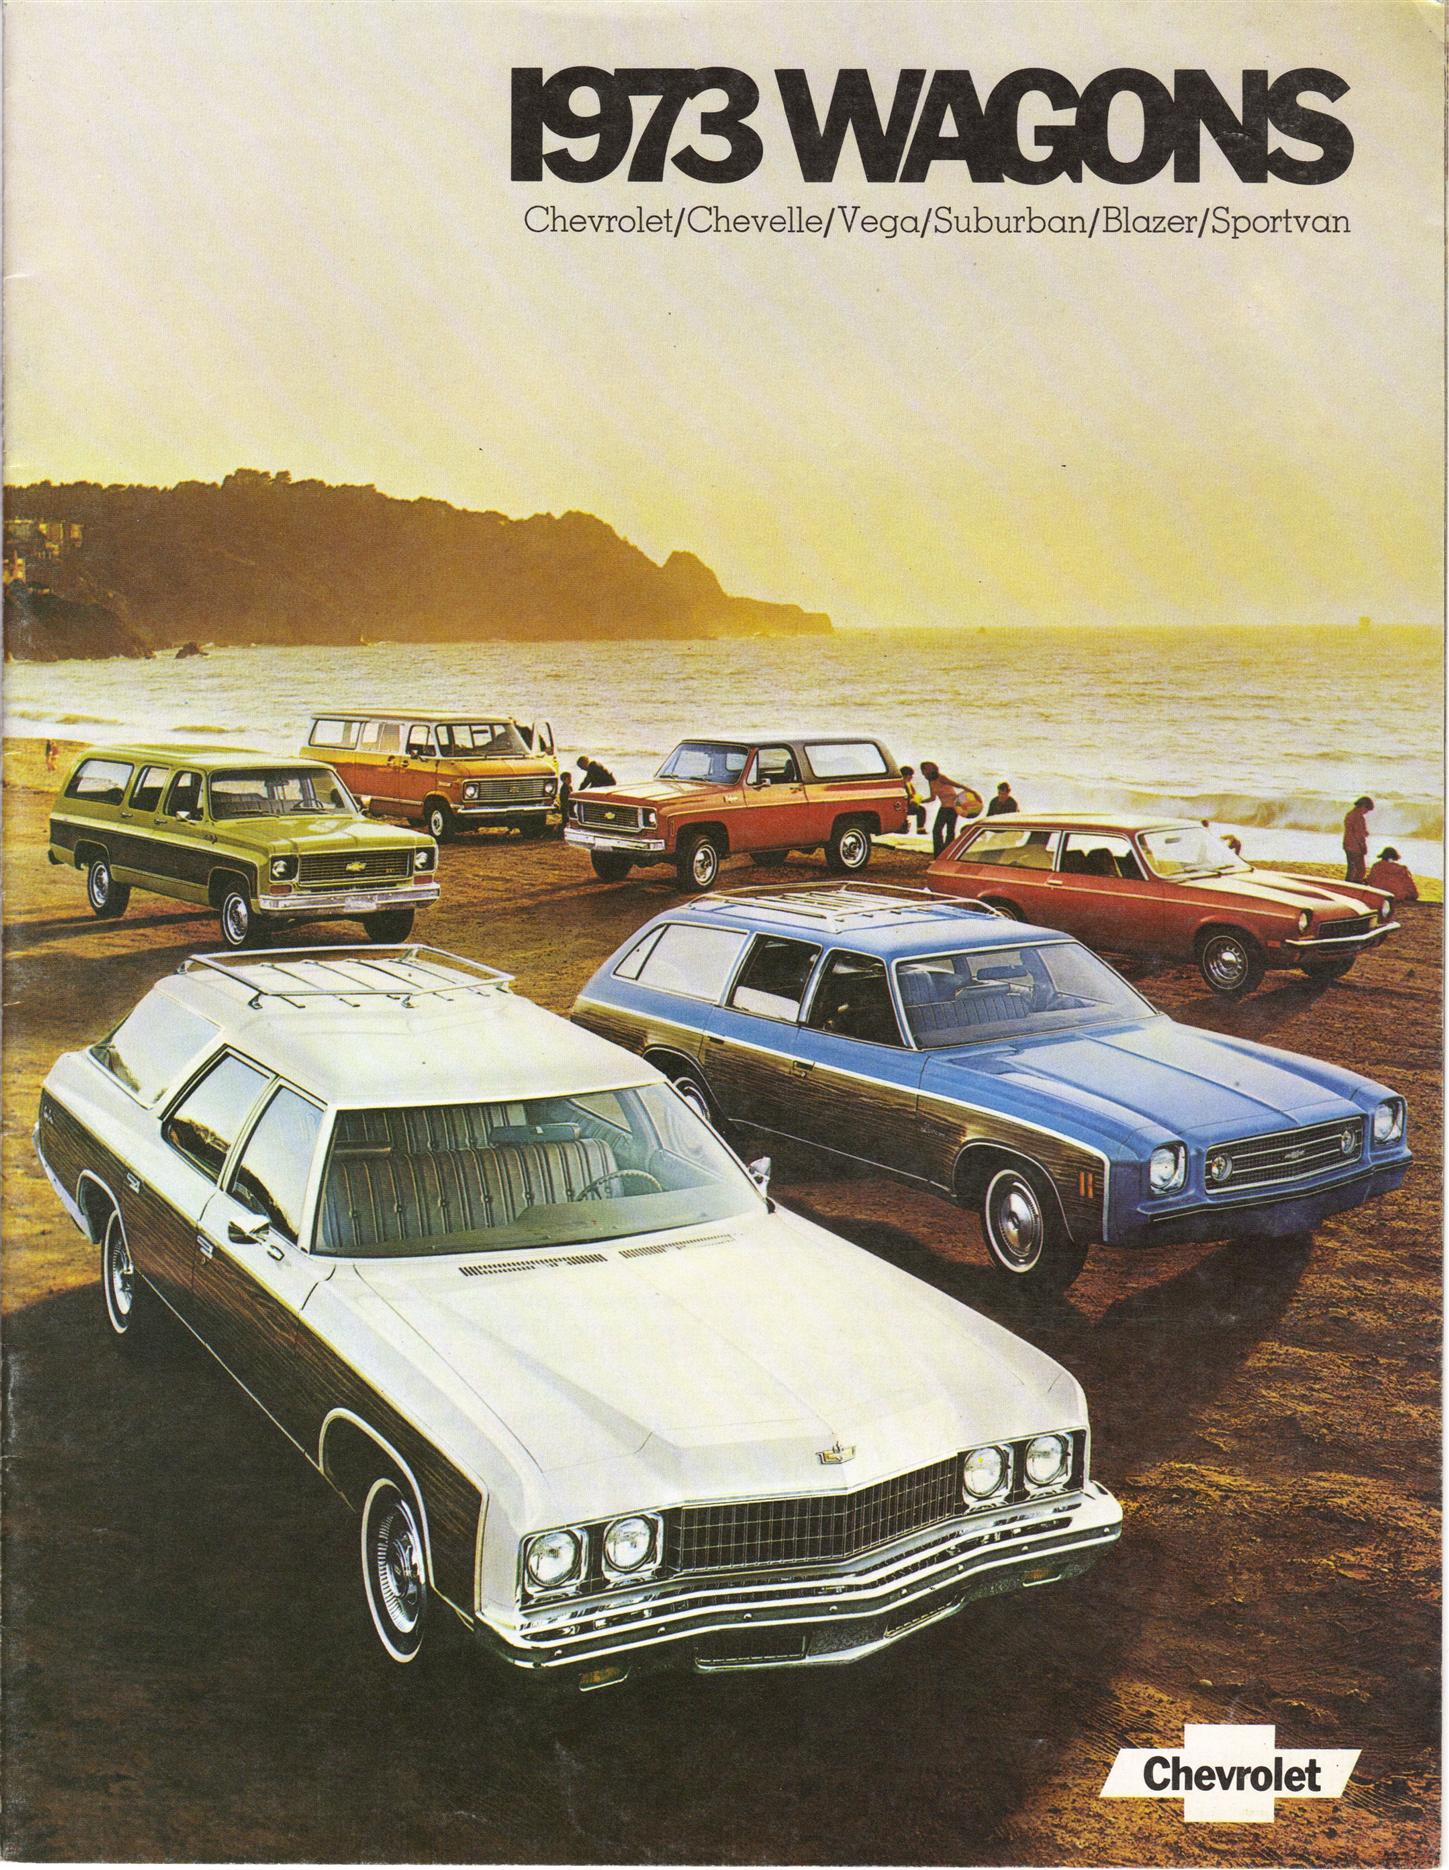 1973 Chevrolet Wagons Pg01 Font Cover